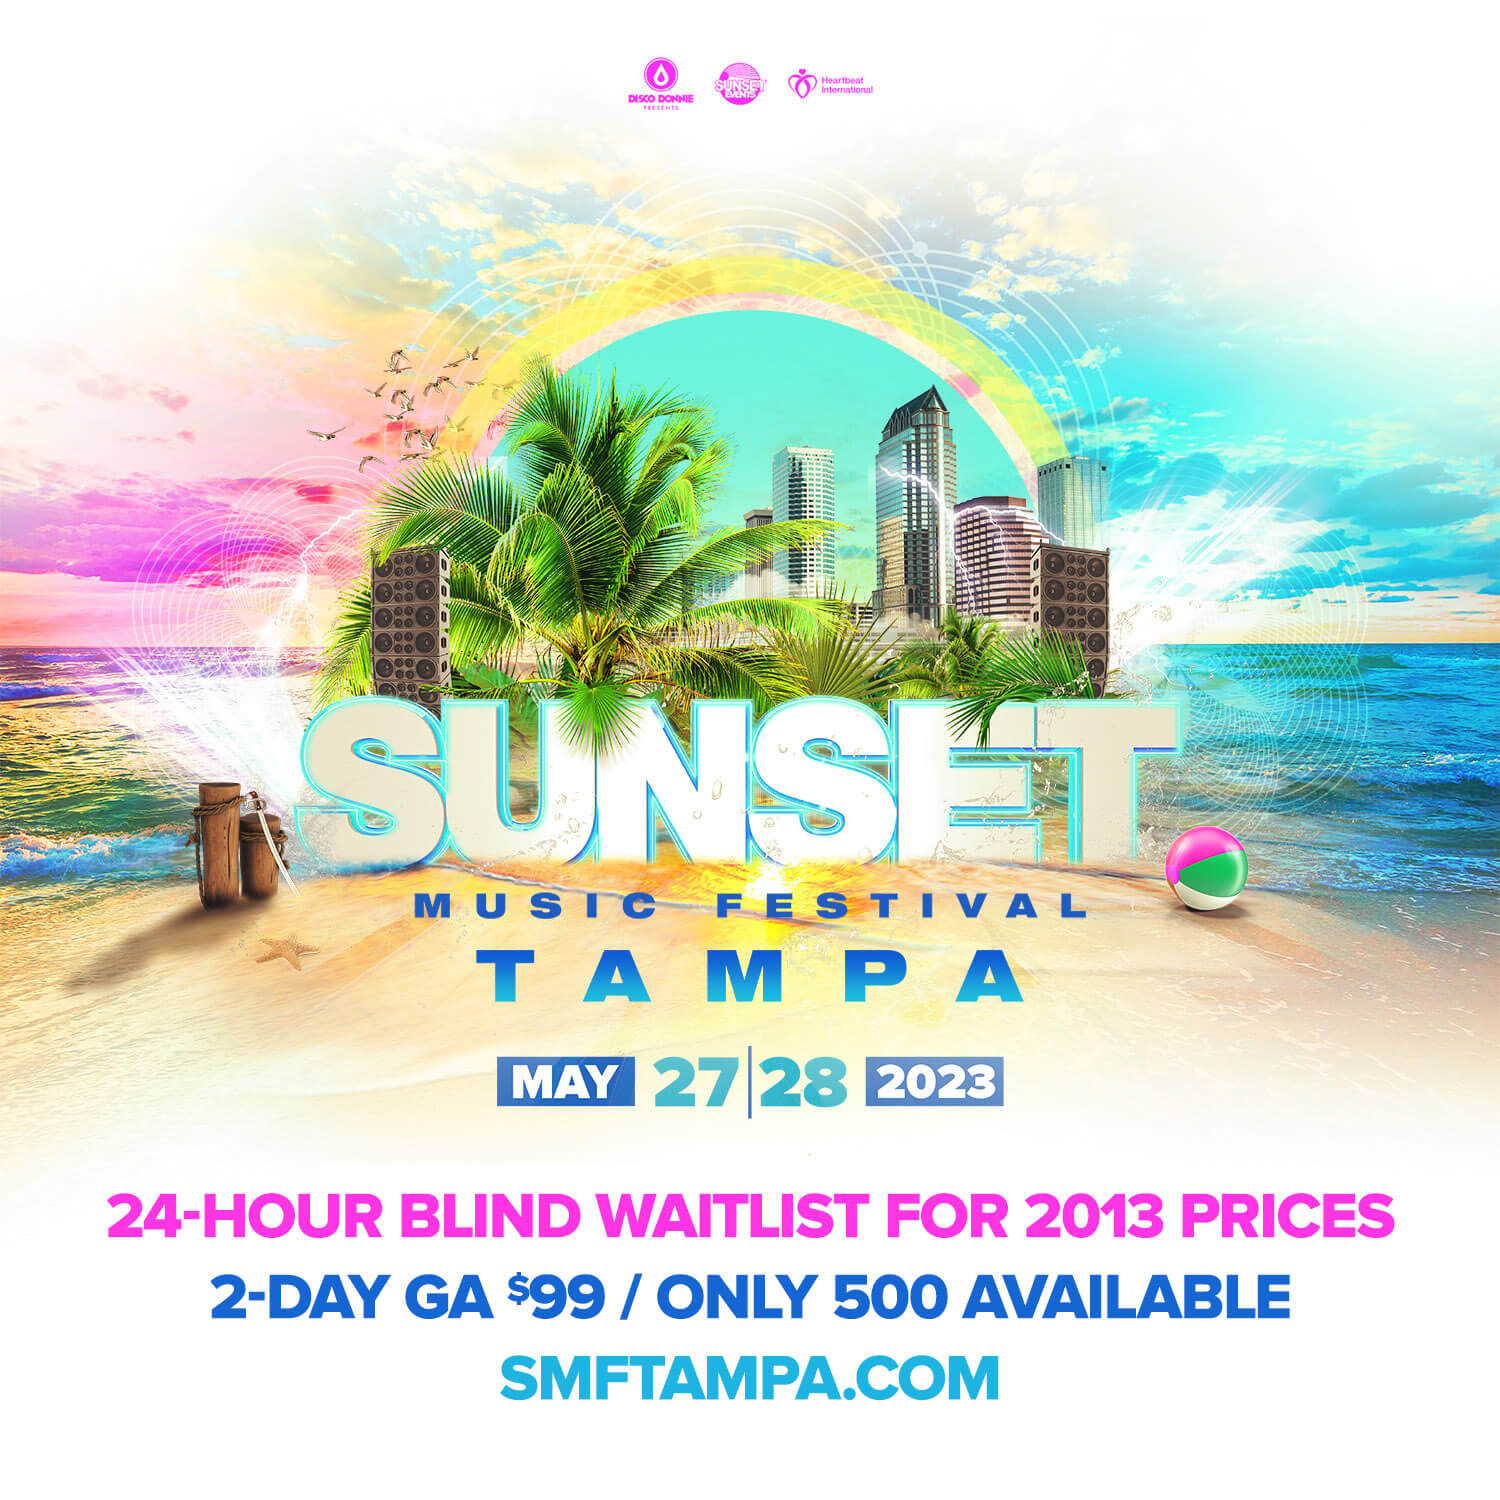 Sunset Music Festival Payment Plan Discount Promo Code,SMF Festival, 2023 Discount Tickets, Tampa Florida, Lineup, GA, May, Saturday, Sunday